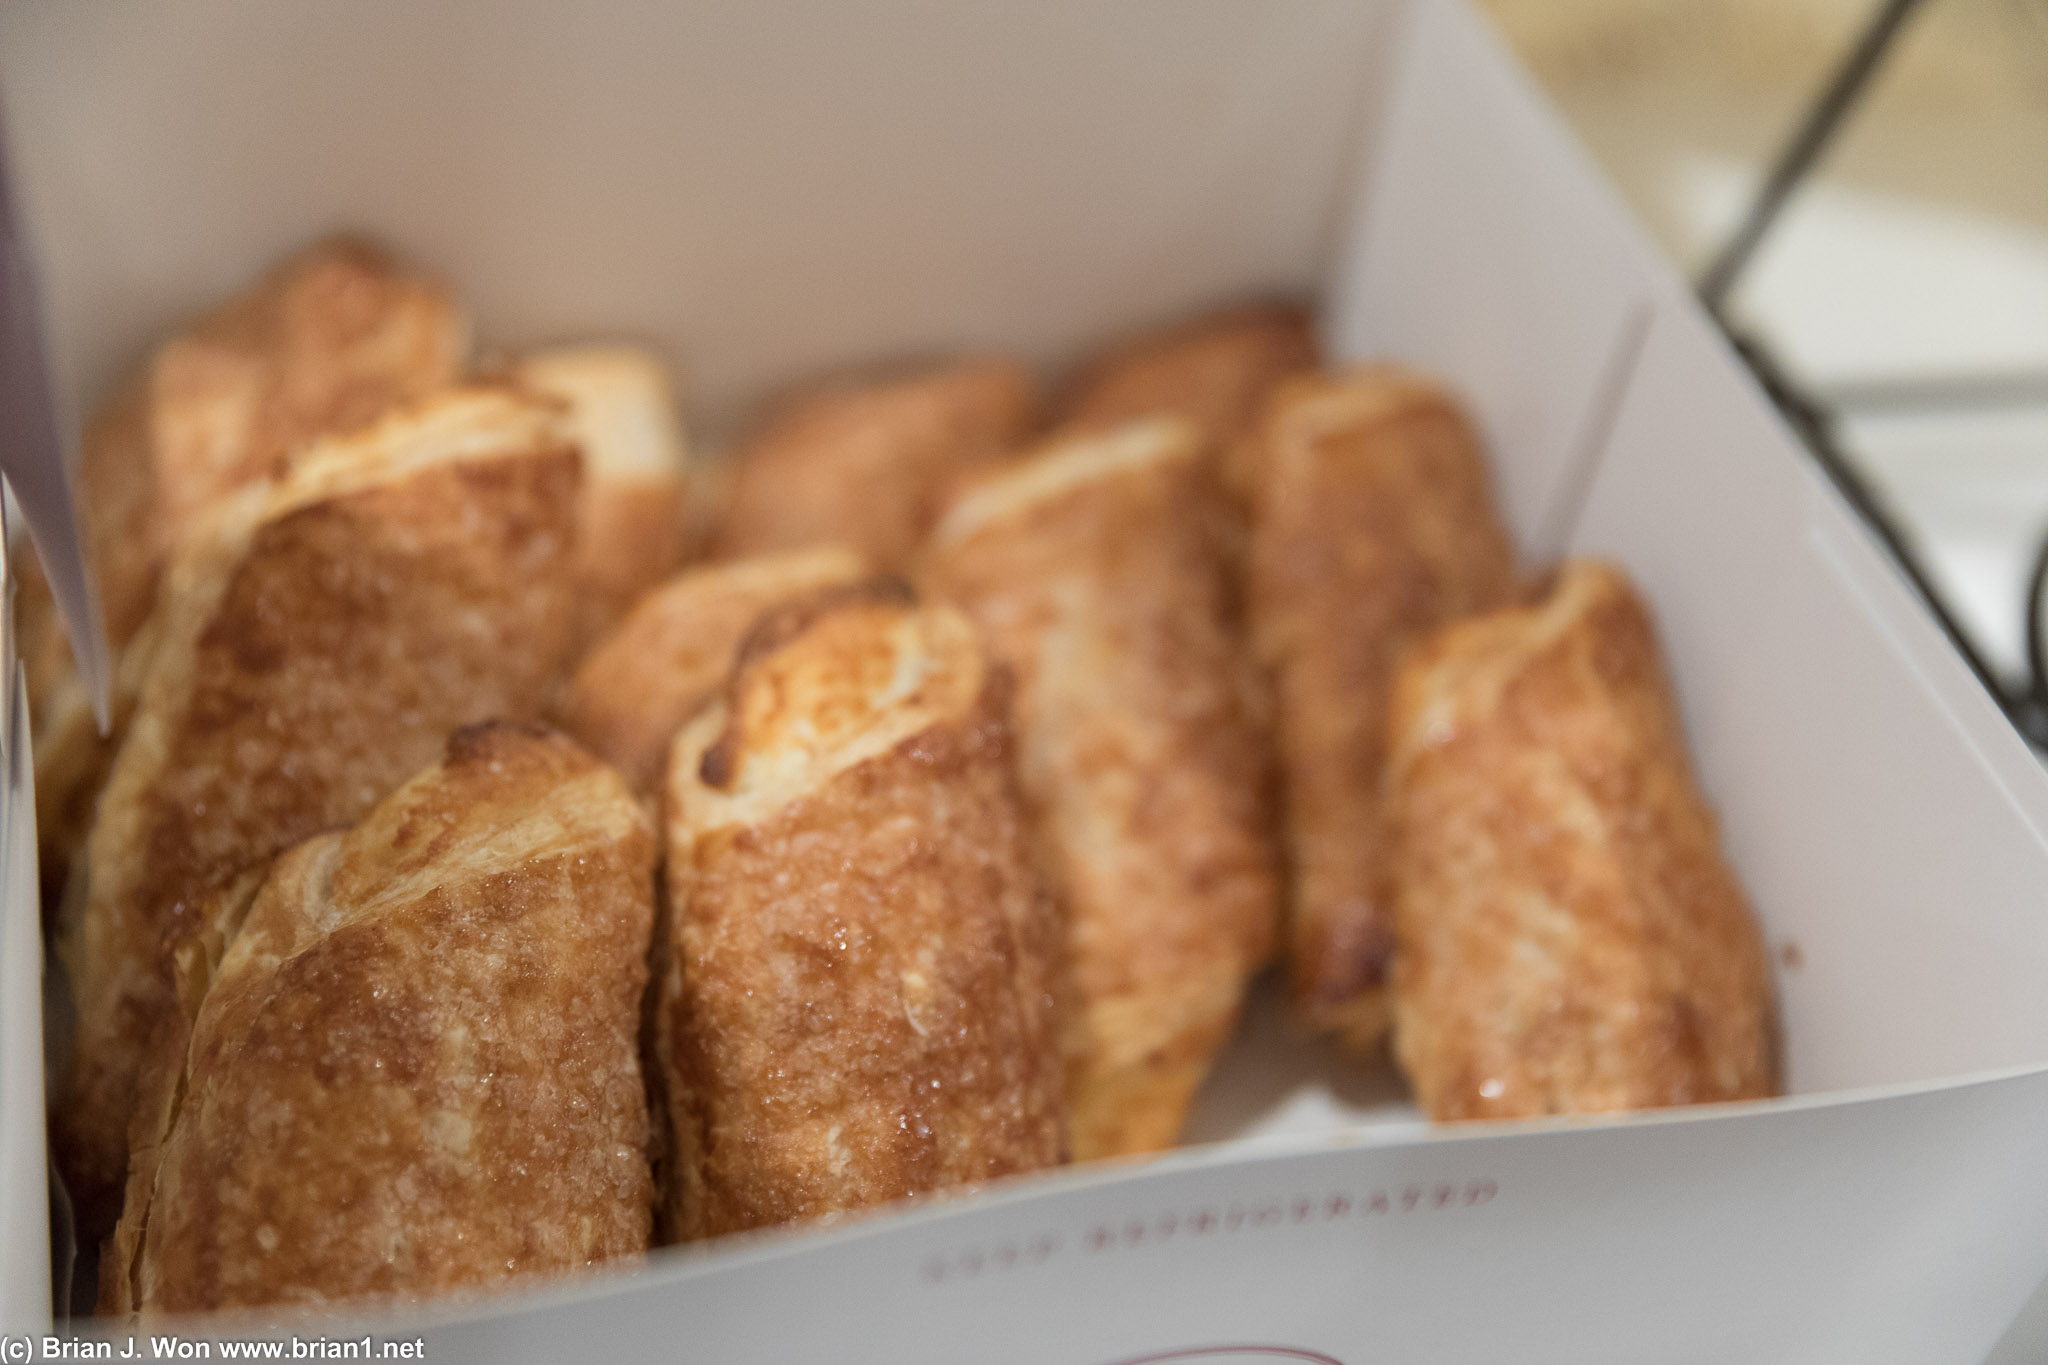 And cheese rolls. MMM.